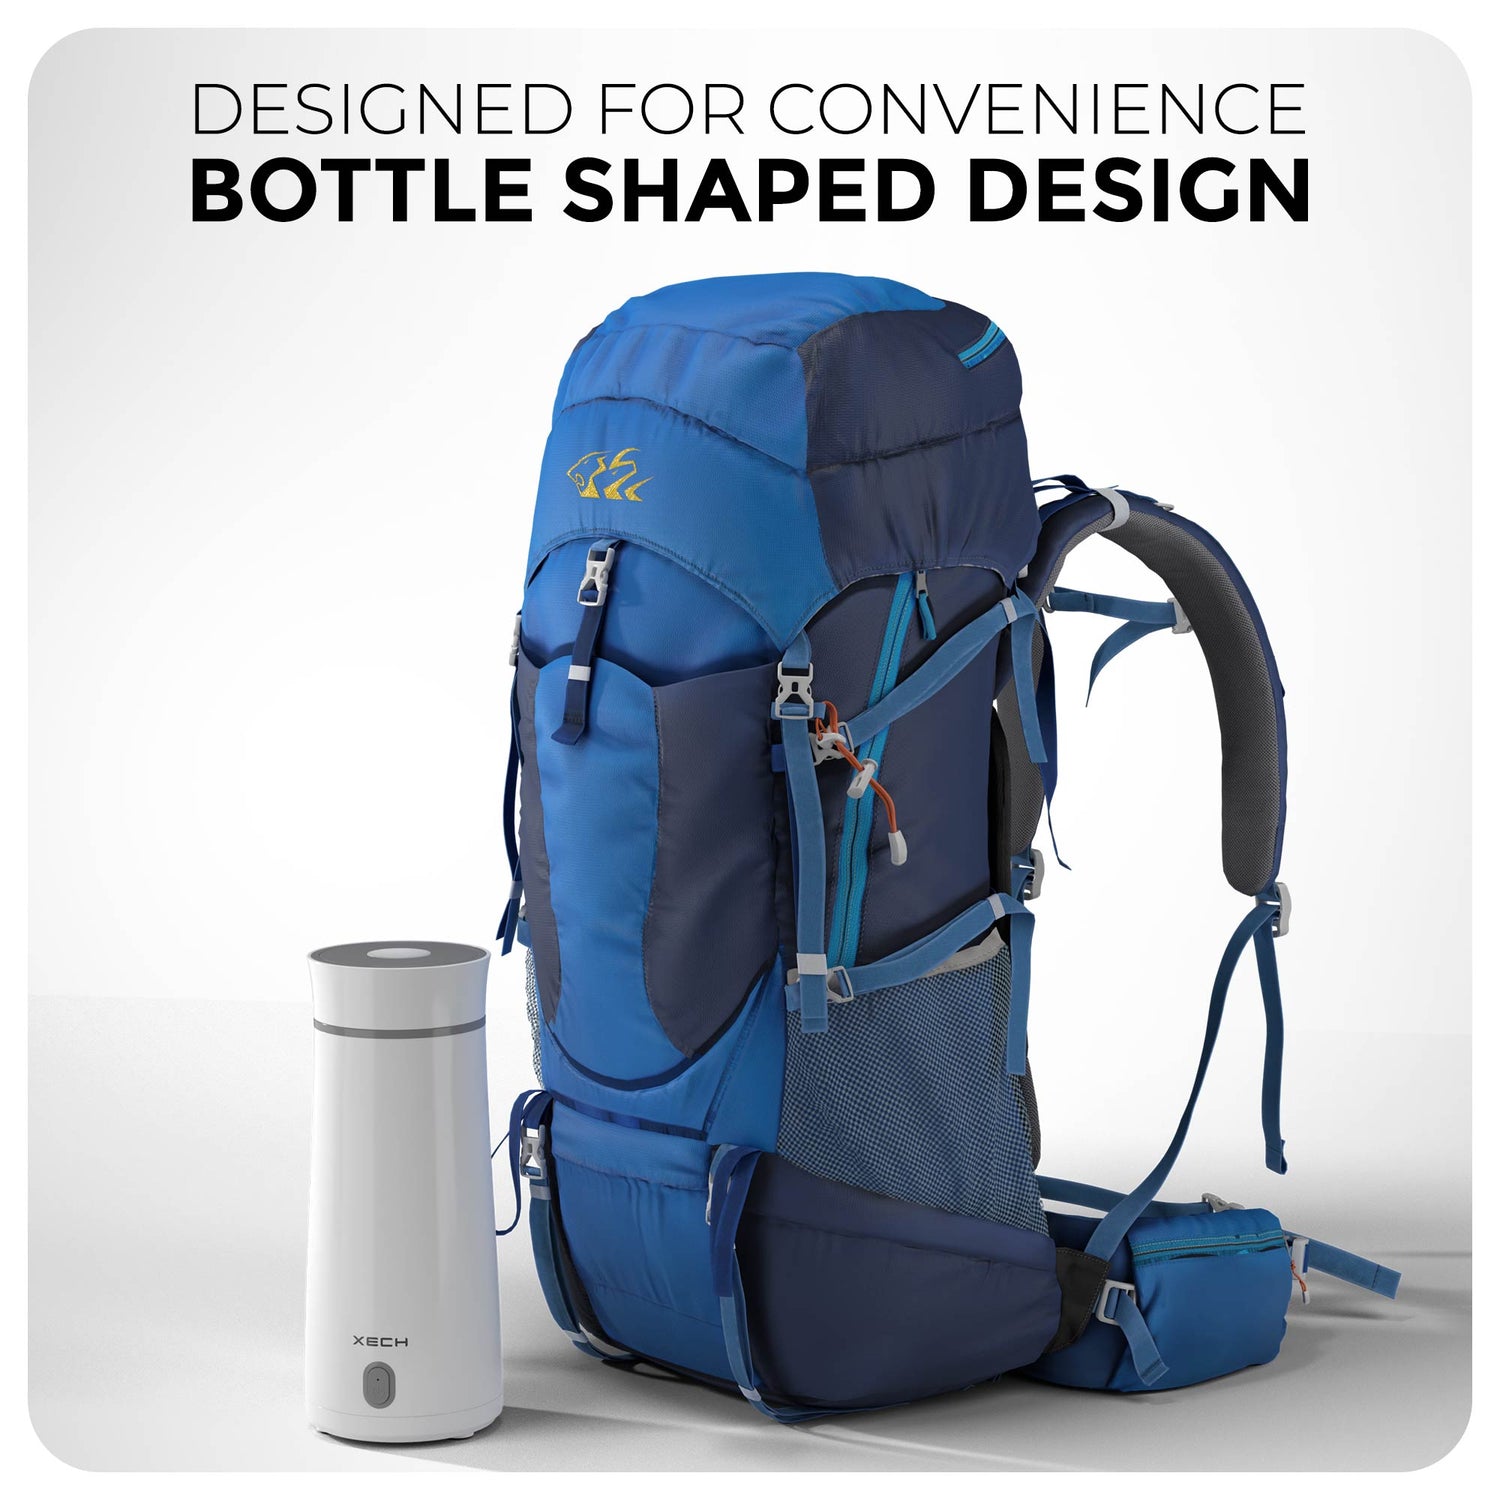 Electric kettle for traveling - the perfect companion for your journey XECH Hydroboil